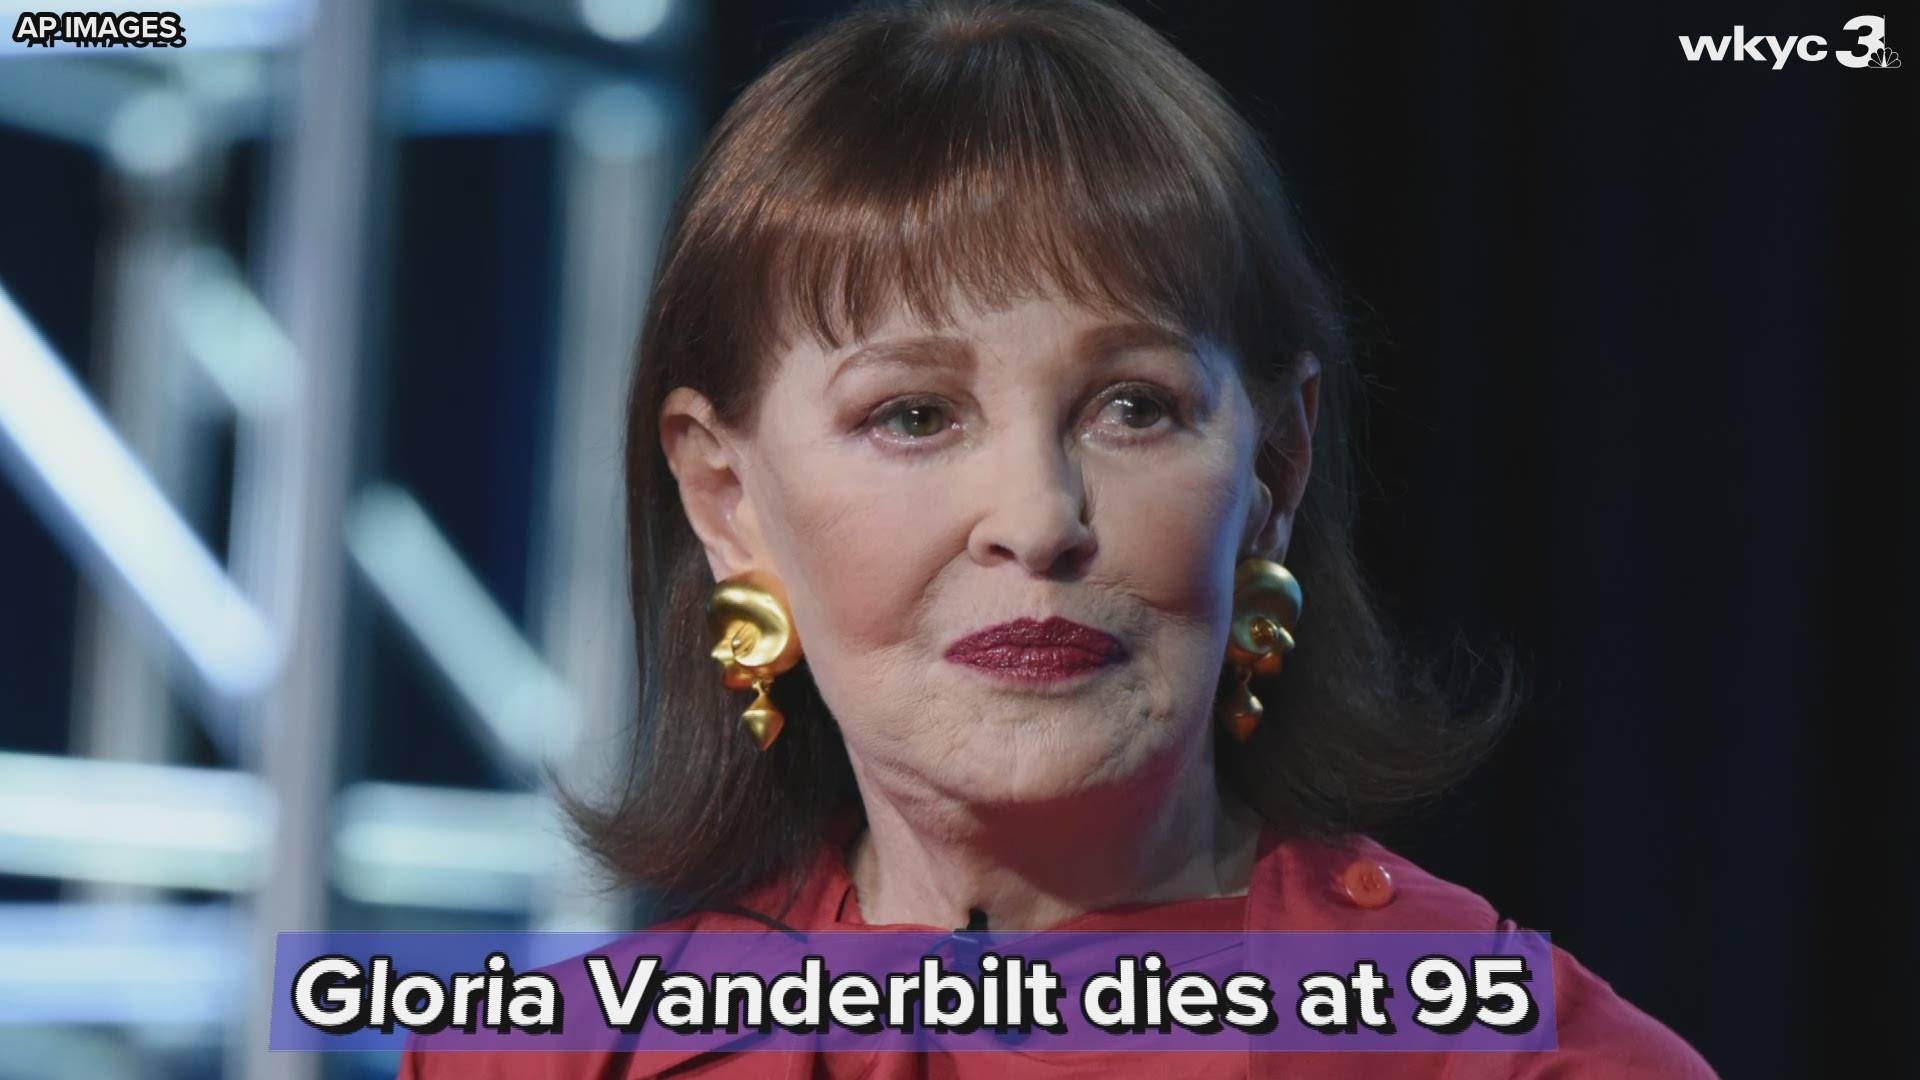 Vanderbilt, the great-great-granddaughter of financier Cornelius Vanderbilt and the mother of CNN newsman Anderson Cooper, who announced her death via a first-person obituary that aired on the network Monday morning.